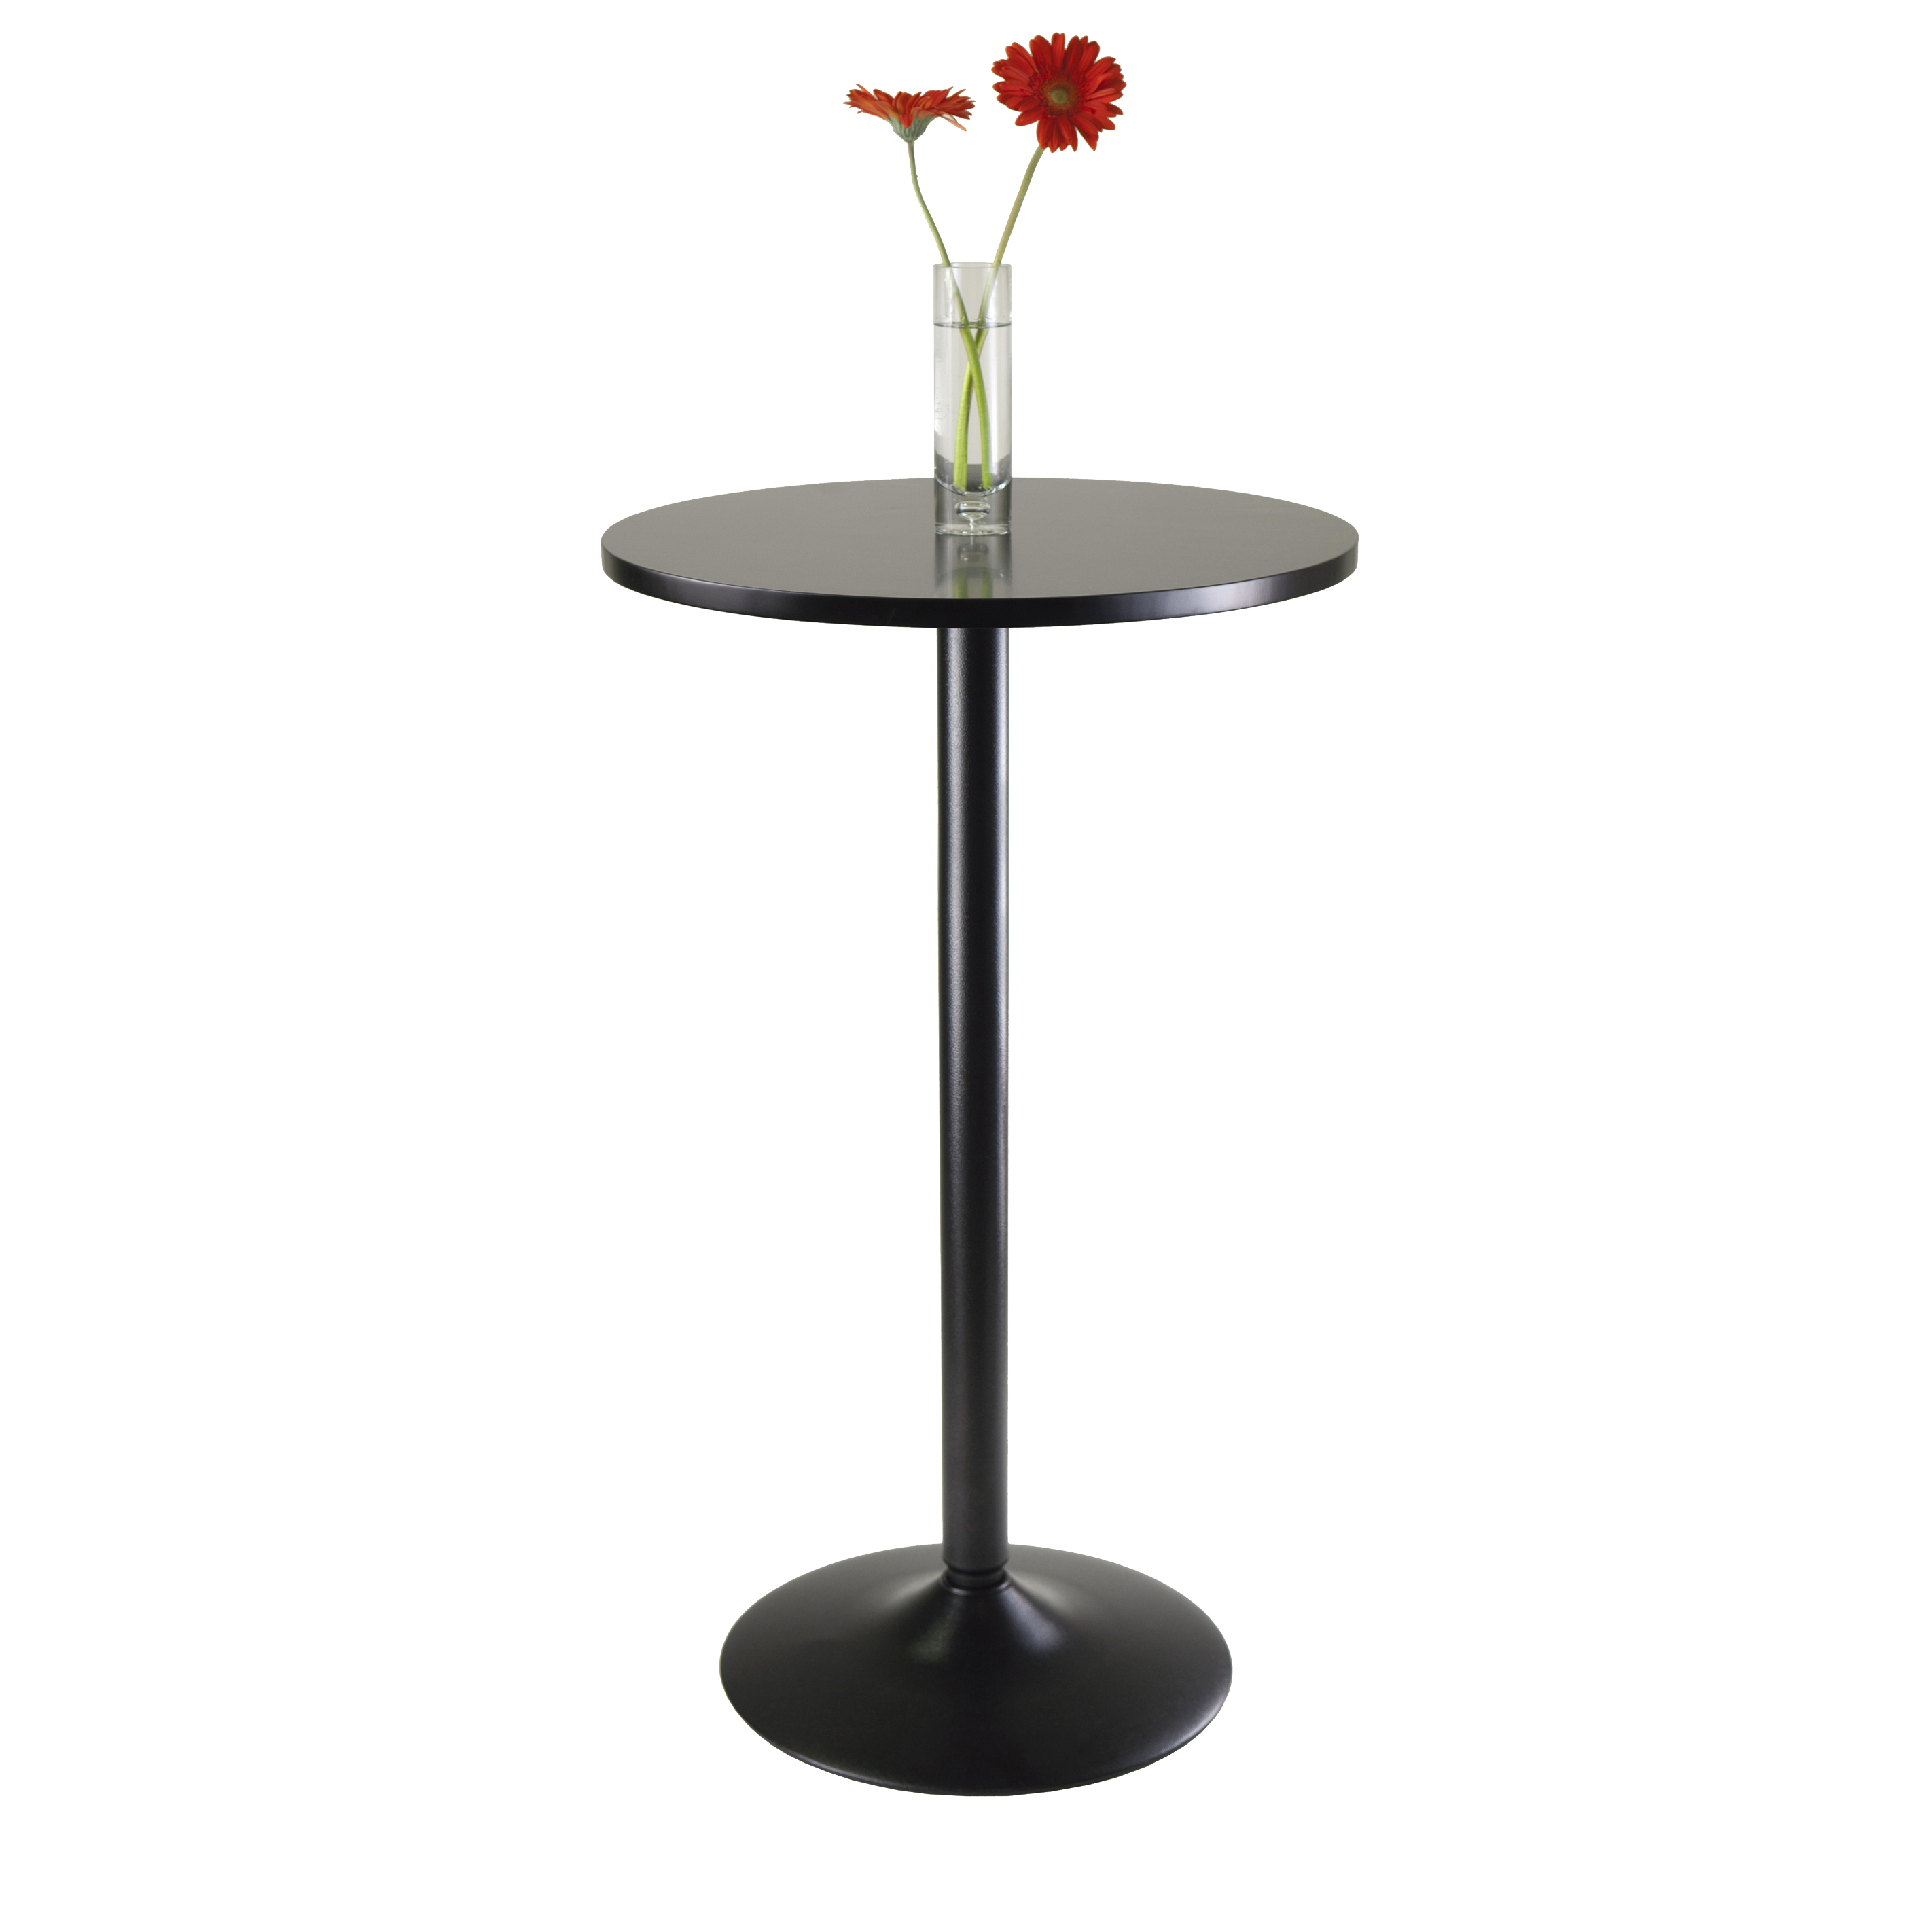 Winsome Obsidian Round Pub Table - Black